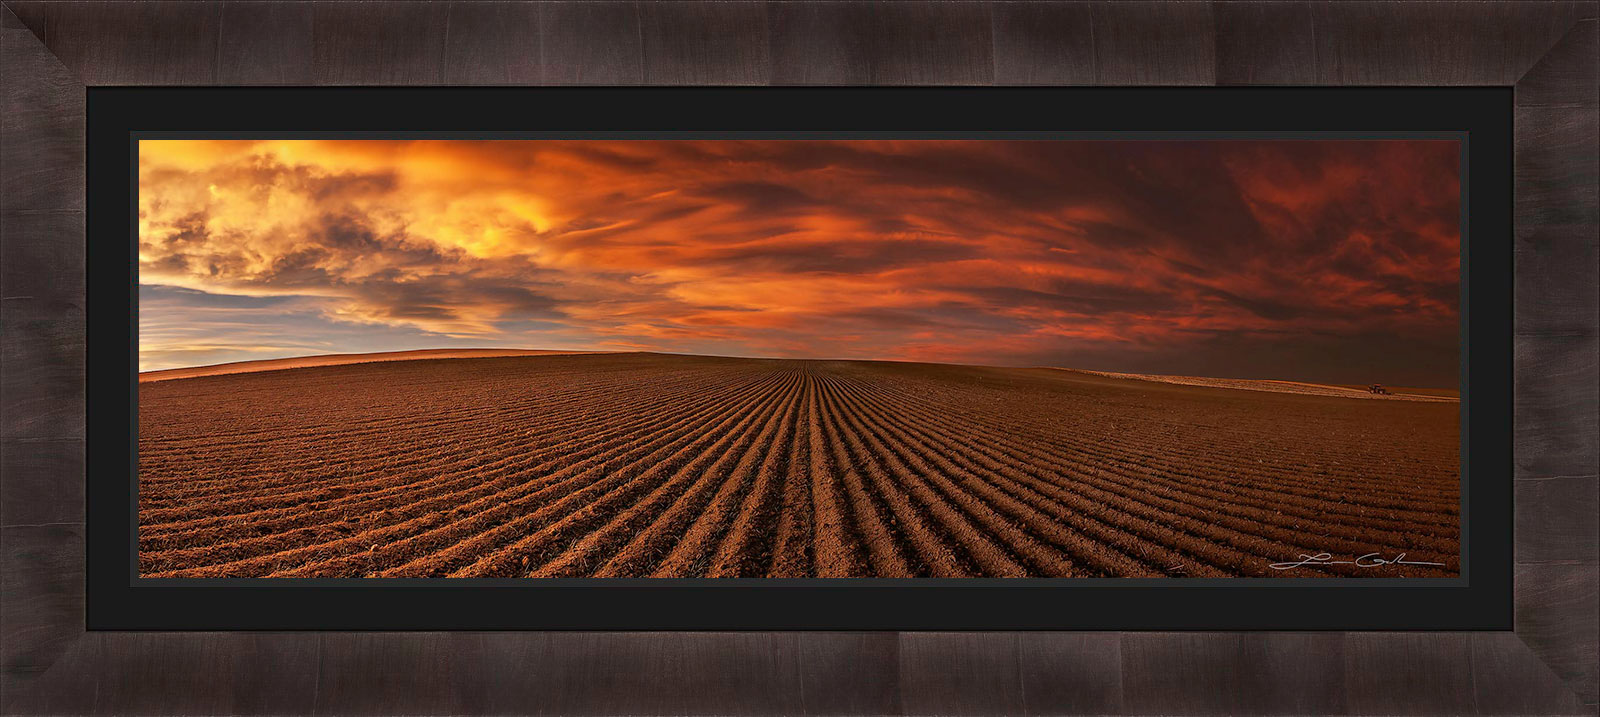 A framed print of a field with dramatic red clouds and skies